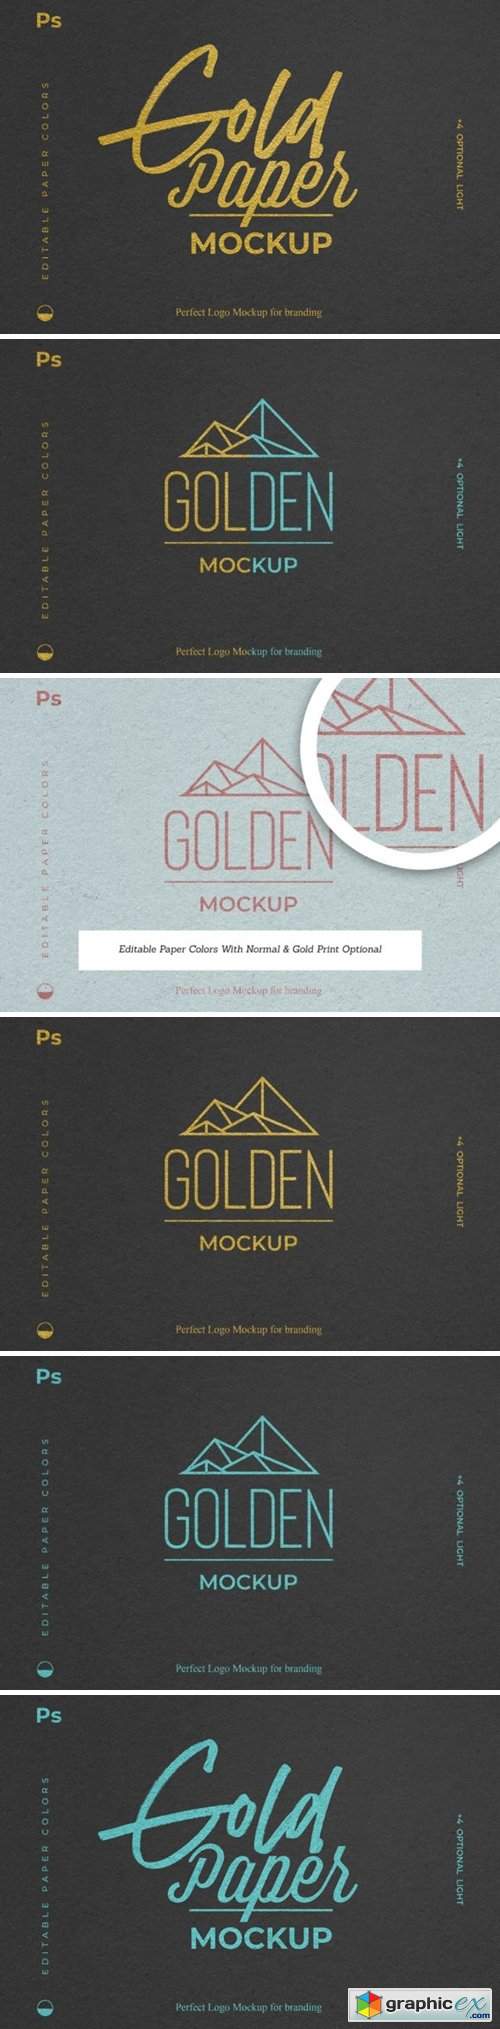 Download Gold Foil Paper Logo Mockup Free Download Vector Stock Image Photoshop Icon